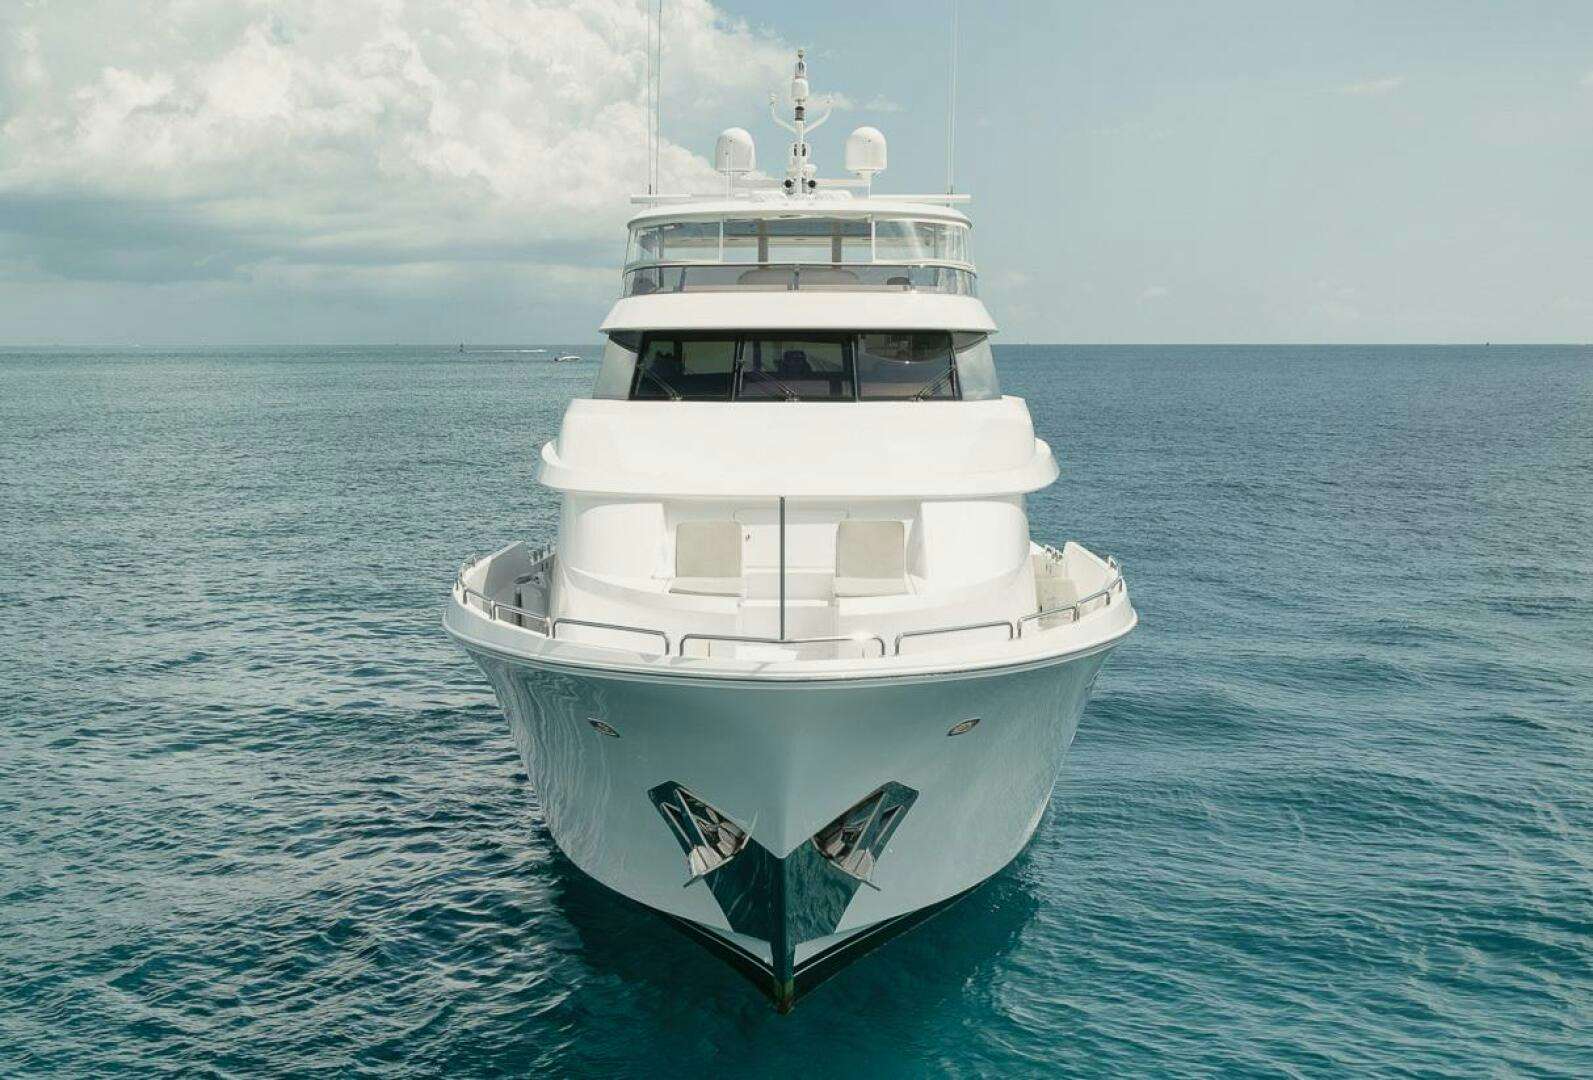 Natural 9 x kaleen
Yacht for Sale